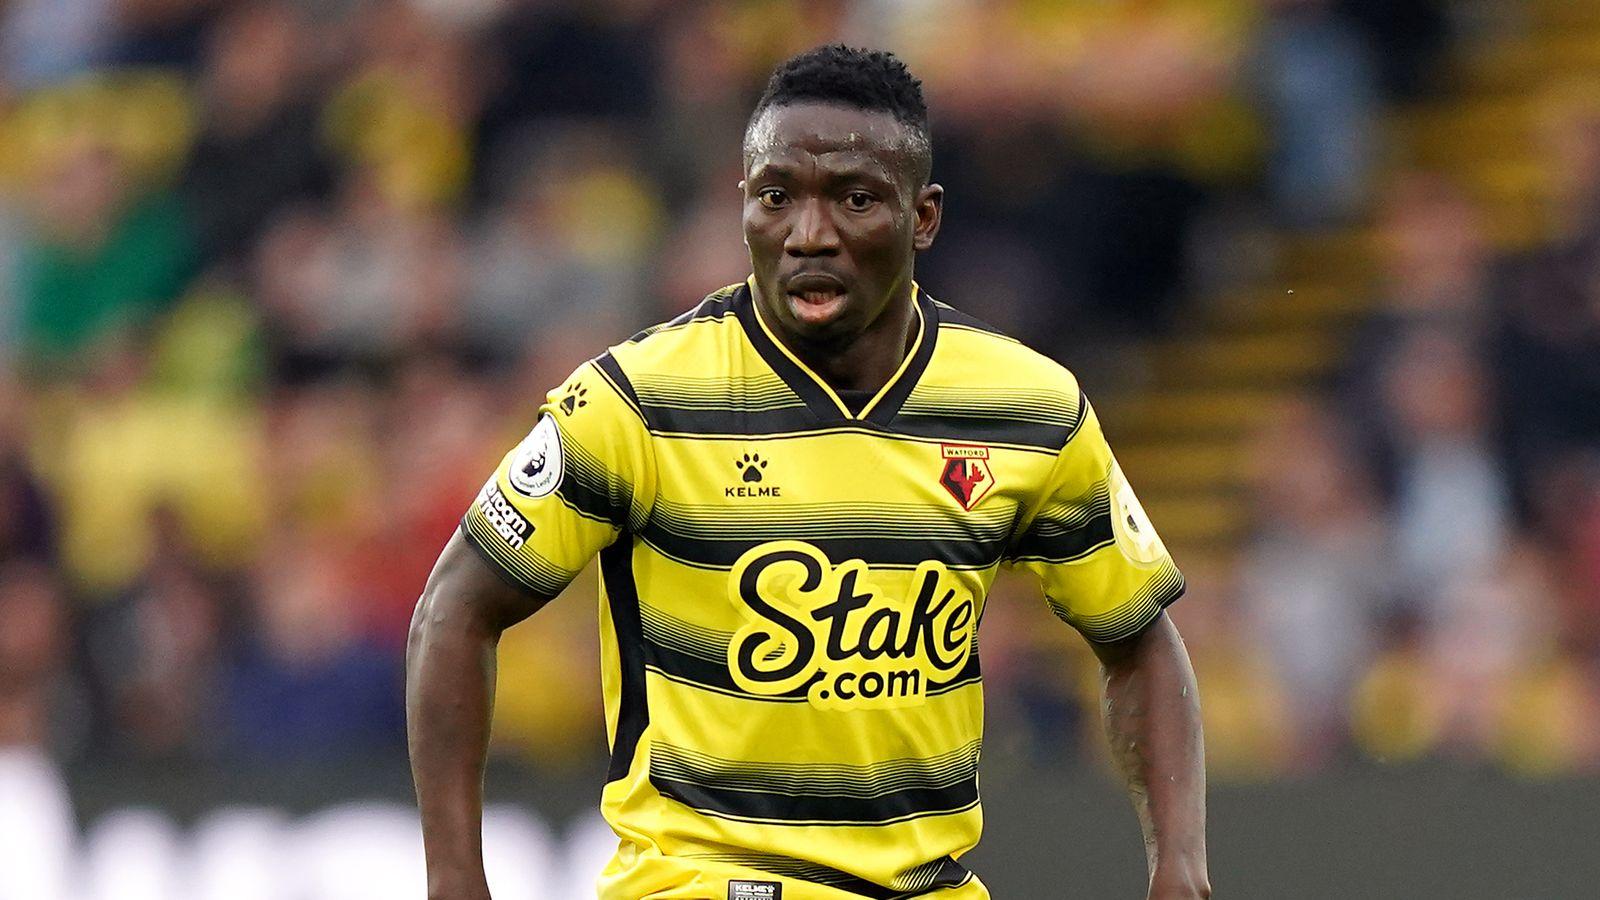 Transfer: Spanish clubs Getafe, Real Valladolid battle for Etebo